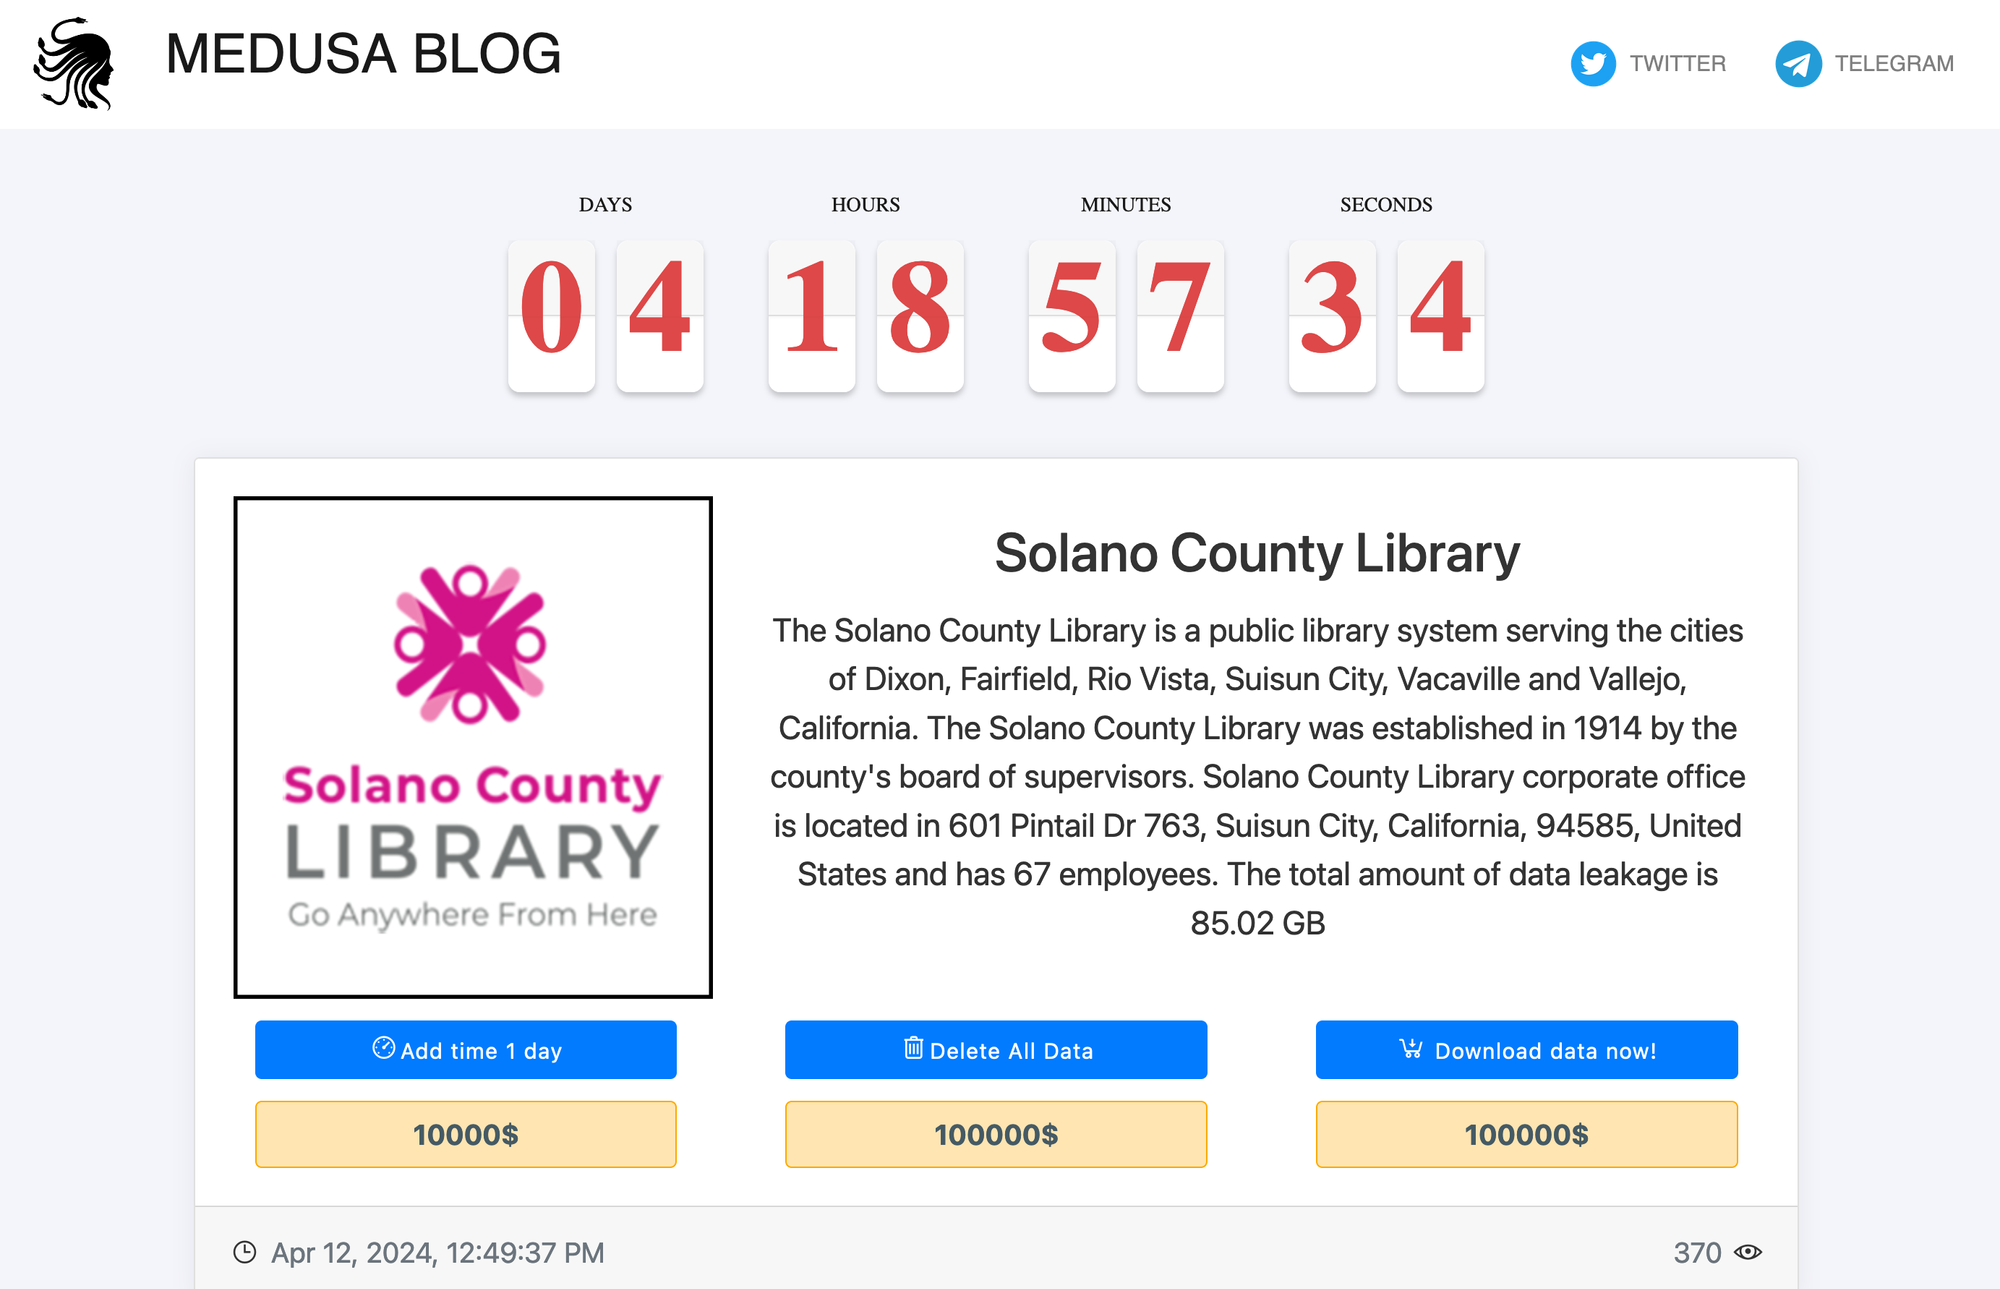 A screenshot of a dark web website that has threatened to release stolen data from the Solano County library system if a ransom is not paid by Friday.